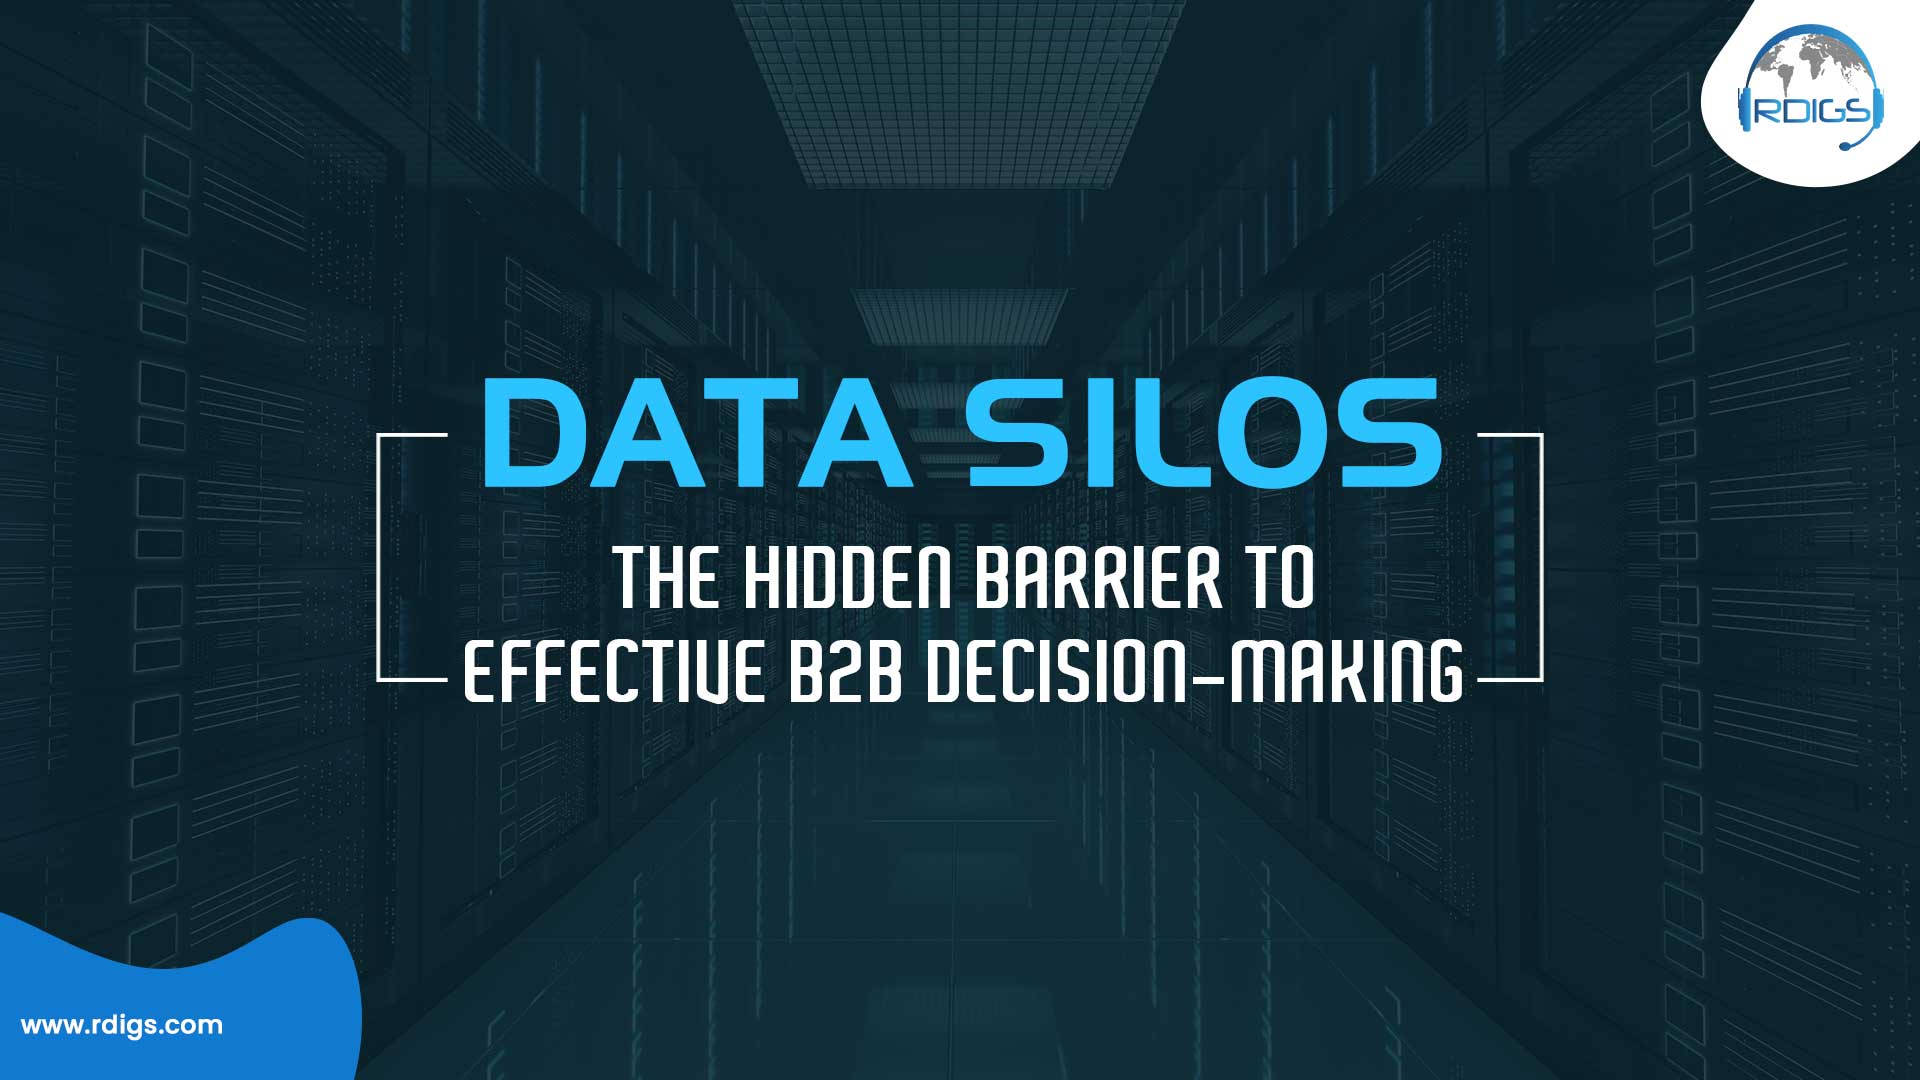 Data Silos: The Hidden Barrier to Effective B2B Decision-Making